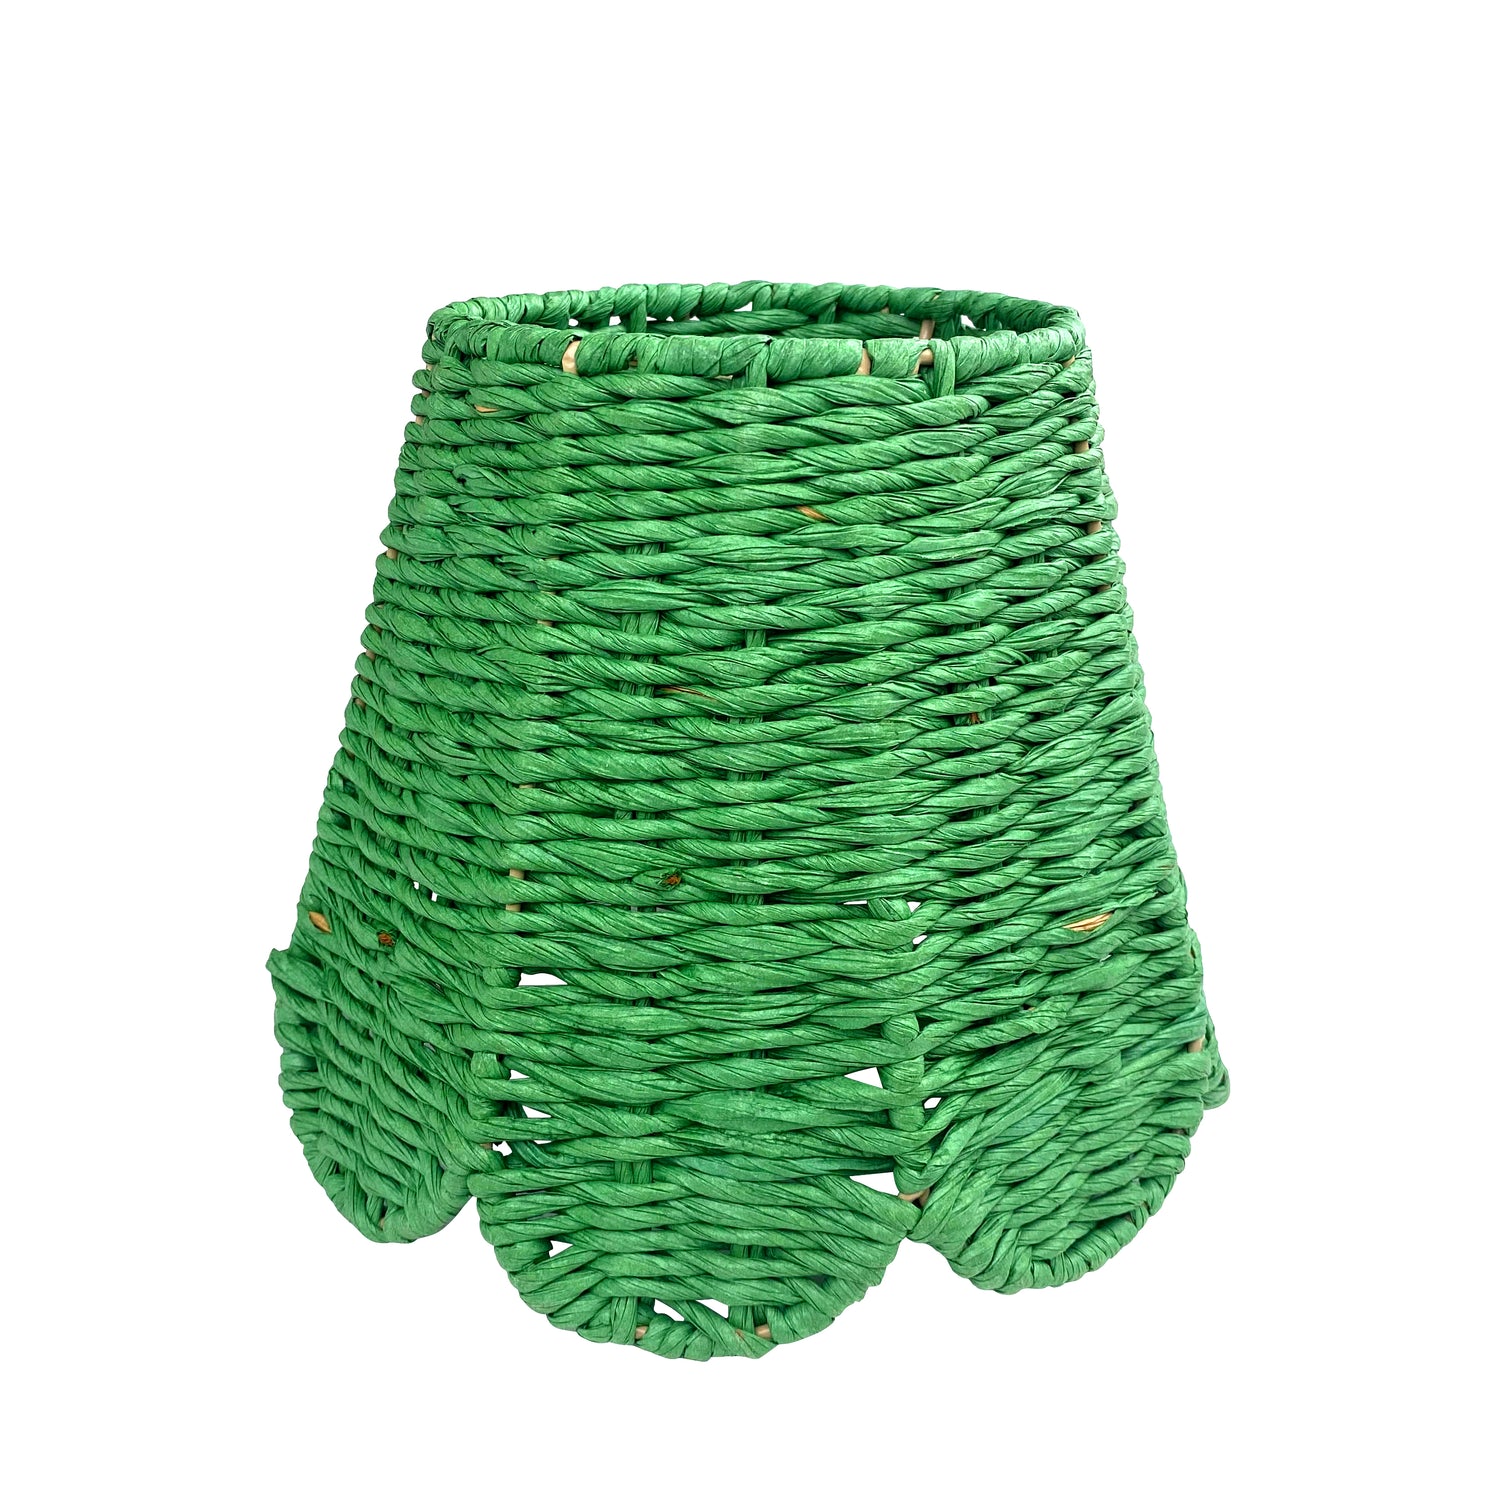 Scalloped Lampshade in Green Twisted Rope